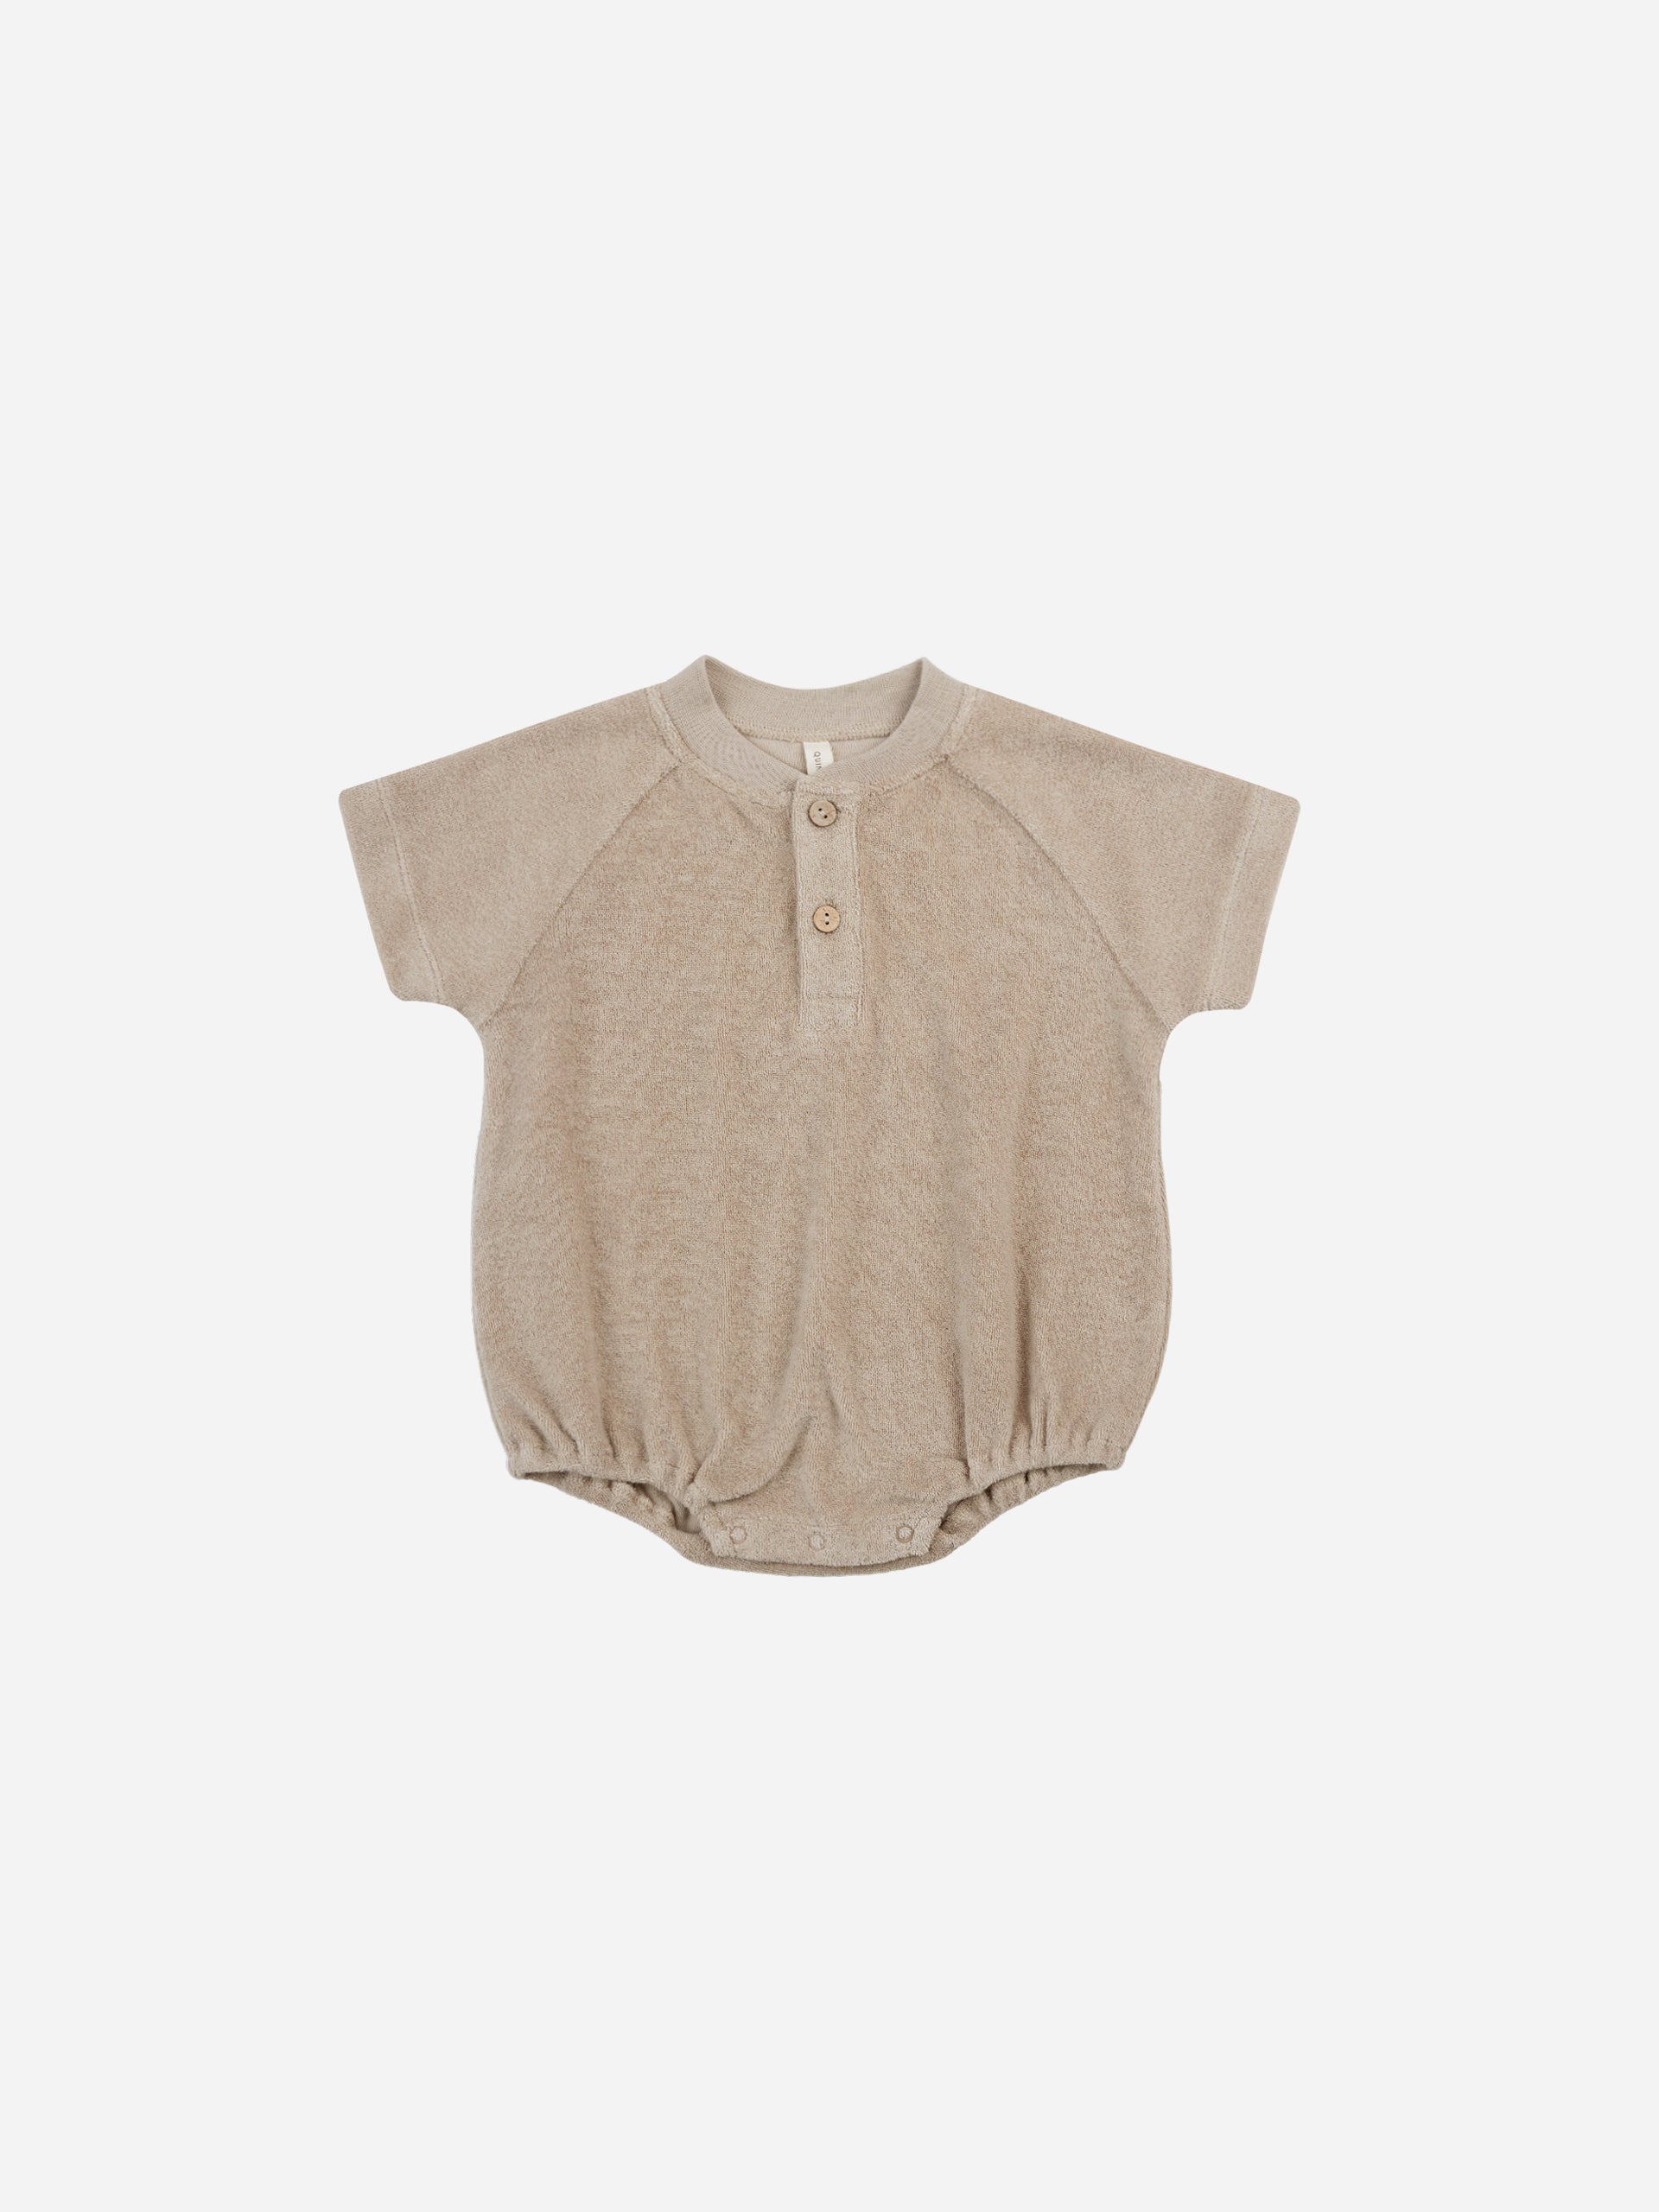 Terry Henley Romper || Oat - Rylee + Cru | Kids Clothes | Trendy Baby Clothes | Modern Infant Outfits |